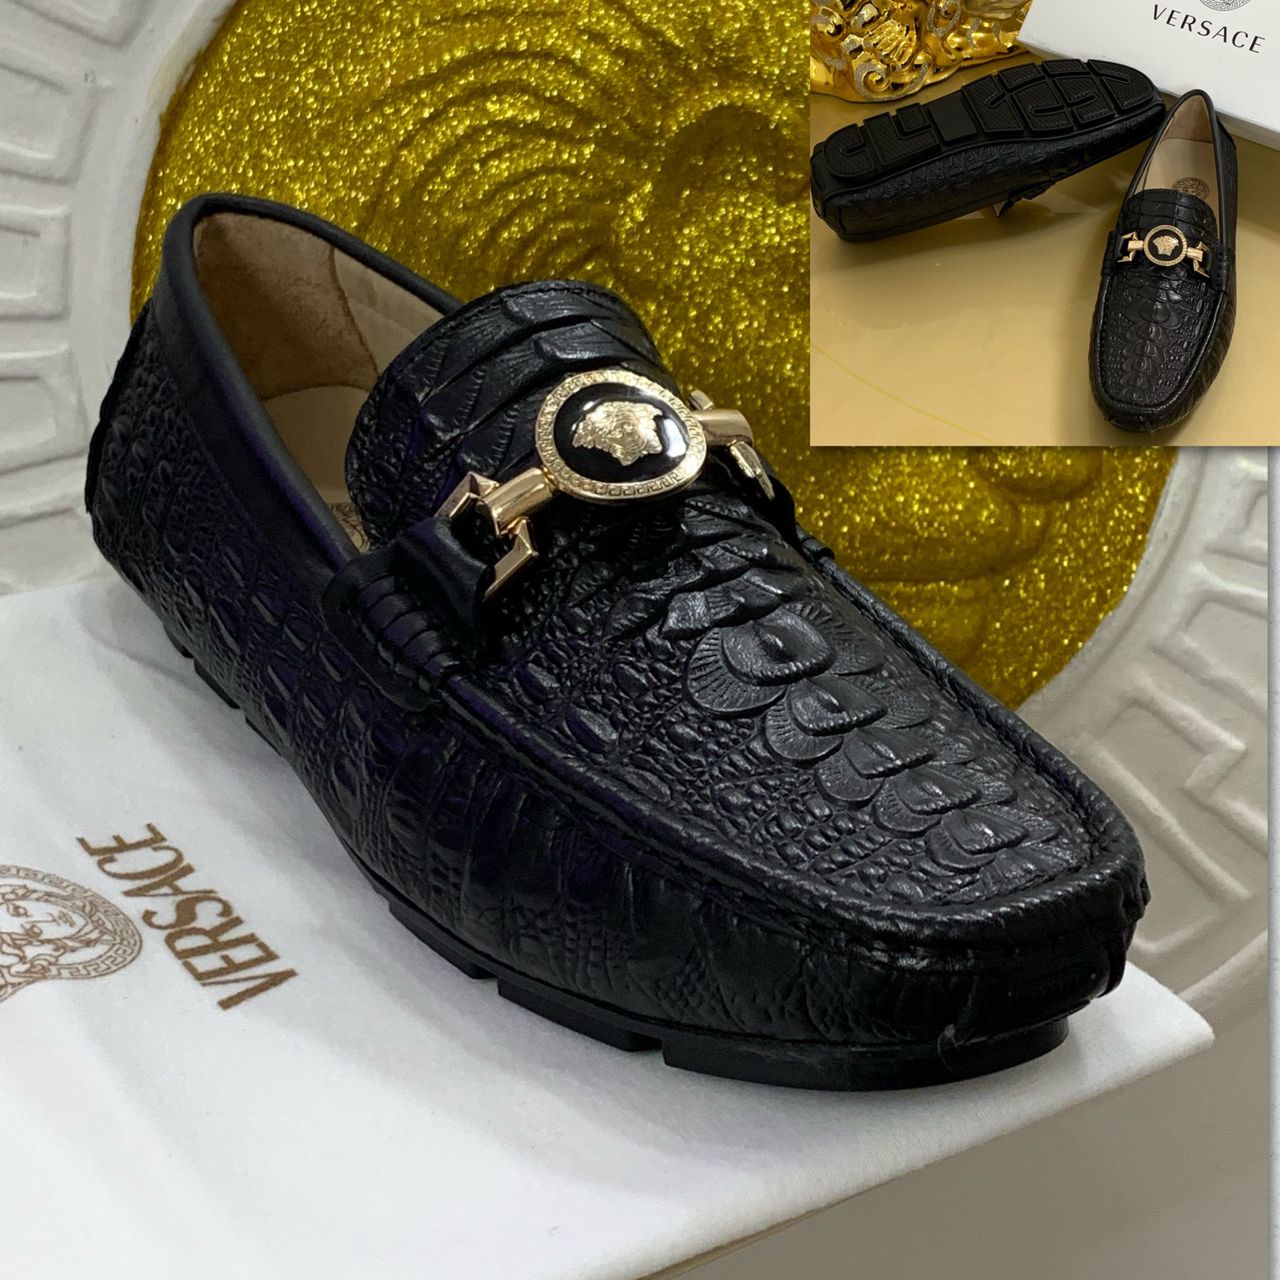 MENS LUXURY TOP QUALITY SLIP ON SHOES for CartRollers Marketplace For Shopping Online, Fashion, Electronics, Phones, Computers and Buy Men Shoe, Home Appliances, Kitchen-wares, Groceries Accessories, ankara, Aso-Ebi, Beads, Boys Casual Wears, Children Children's Wears ,Corporate Shoes, Cosmetics Dress ,Dresses Fashion, Girls' Dresses ,Girls' Wears, Hair Care ,Jewelries ,Jewelry Kids, Kids' Fashion Ladies ,Wears Lapel Pins, Loafers Shoe Men ,Men's Caftan, Men's Casual Shoes, Men's Fashion, Men's Shoes, Men's Wears, Moccasin Shoe, Natural Hair, In Lagos Nigeria